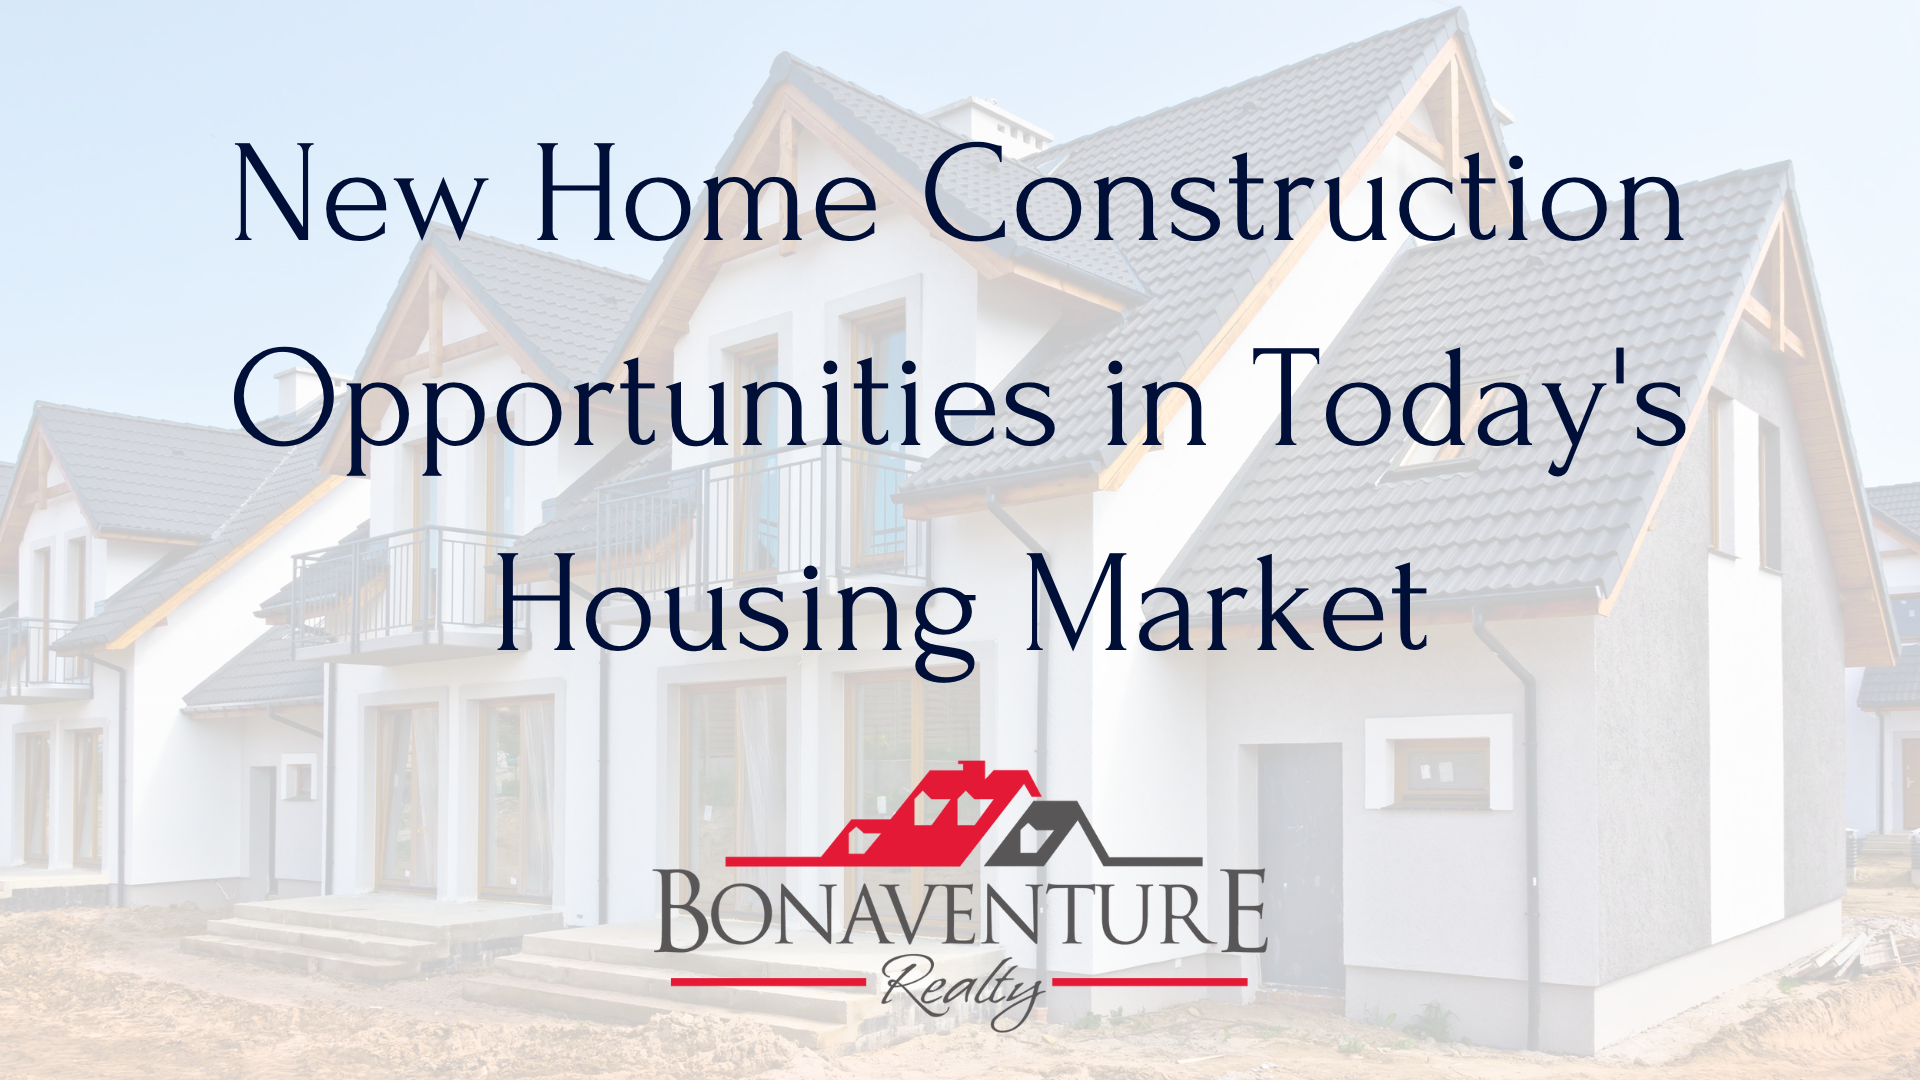 This image shows a newly built home in today's housing market, featuring the Bonaventure Realty logo. It highlights the importance of considering this option when looking to buy or sell a house.